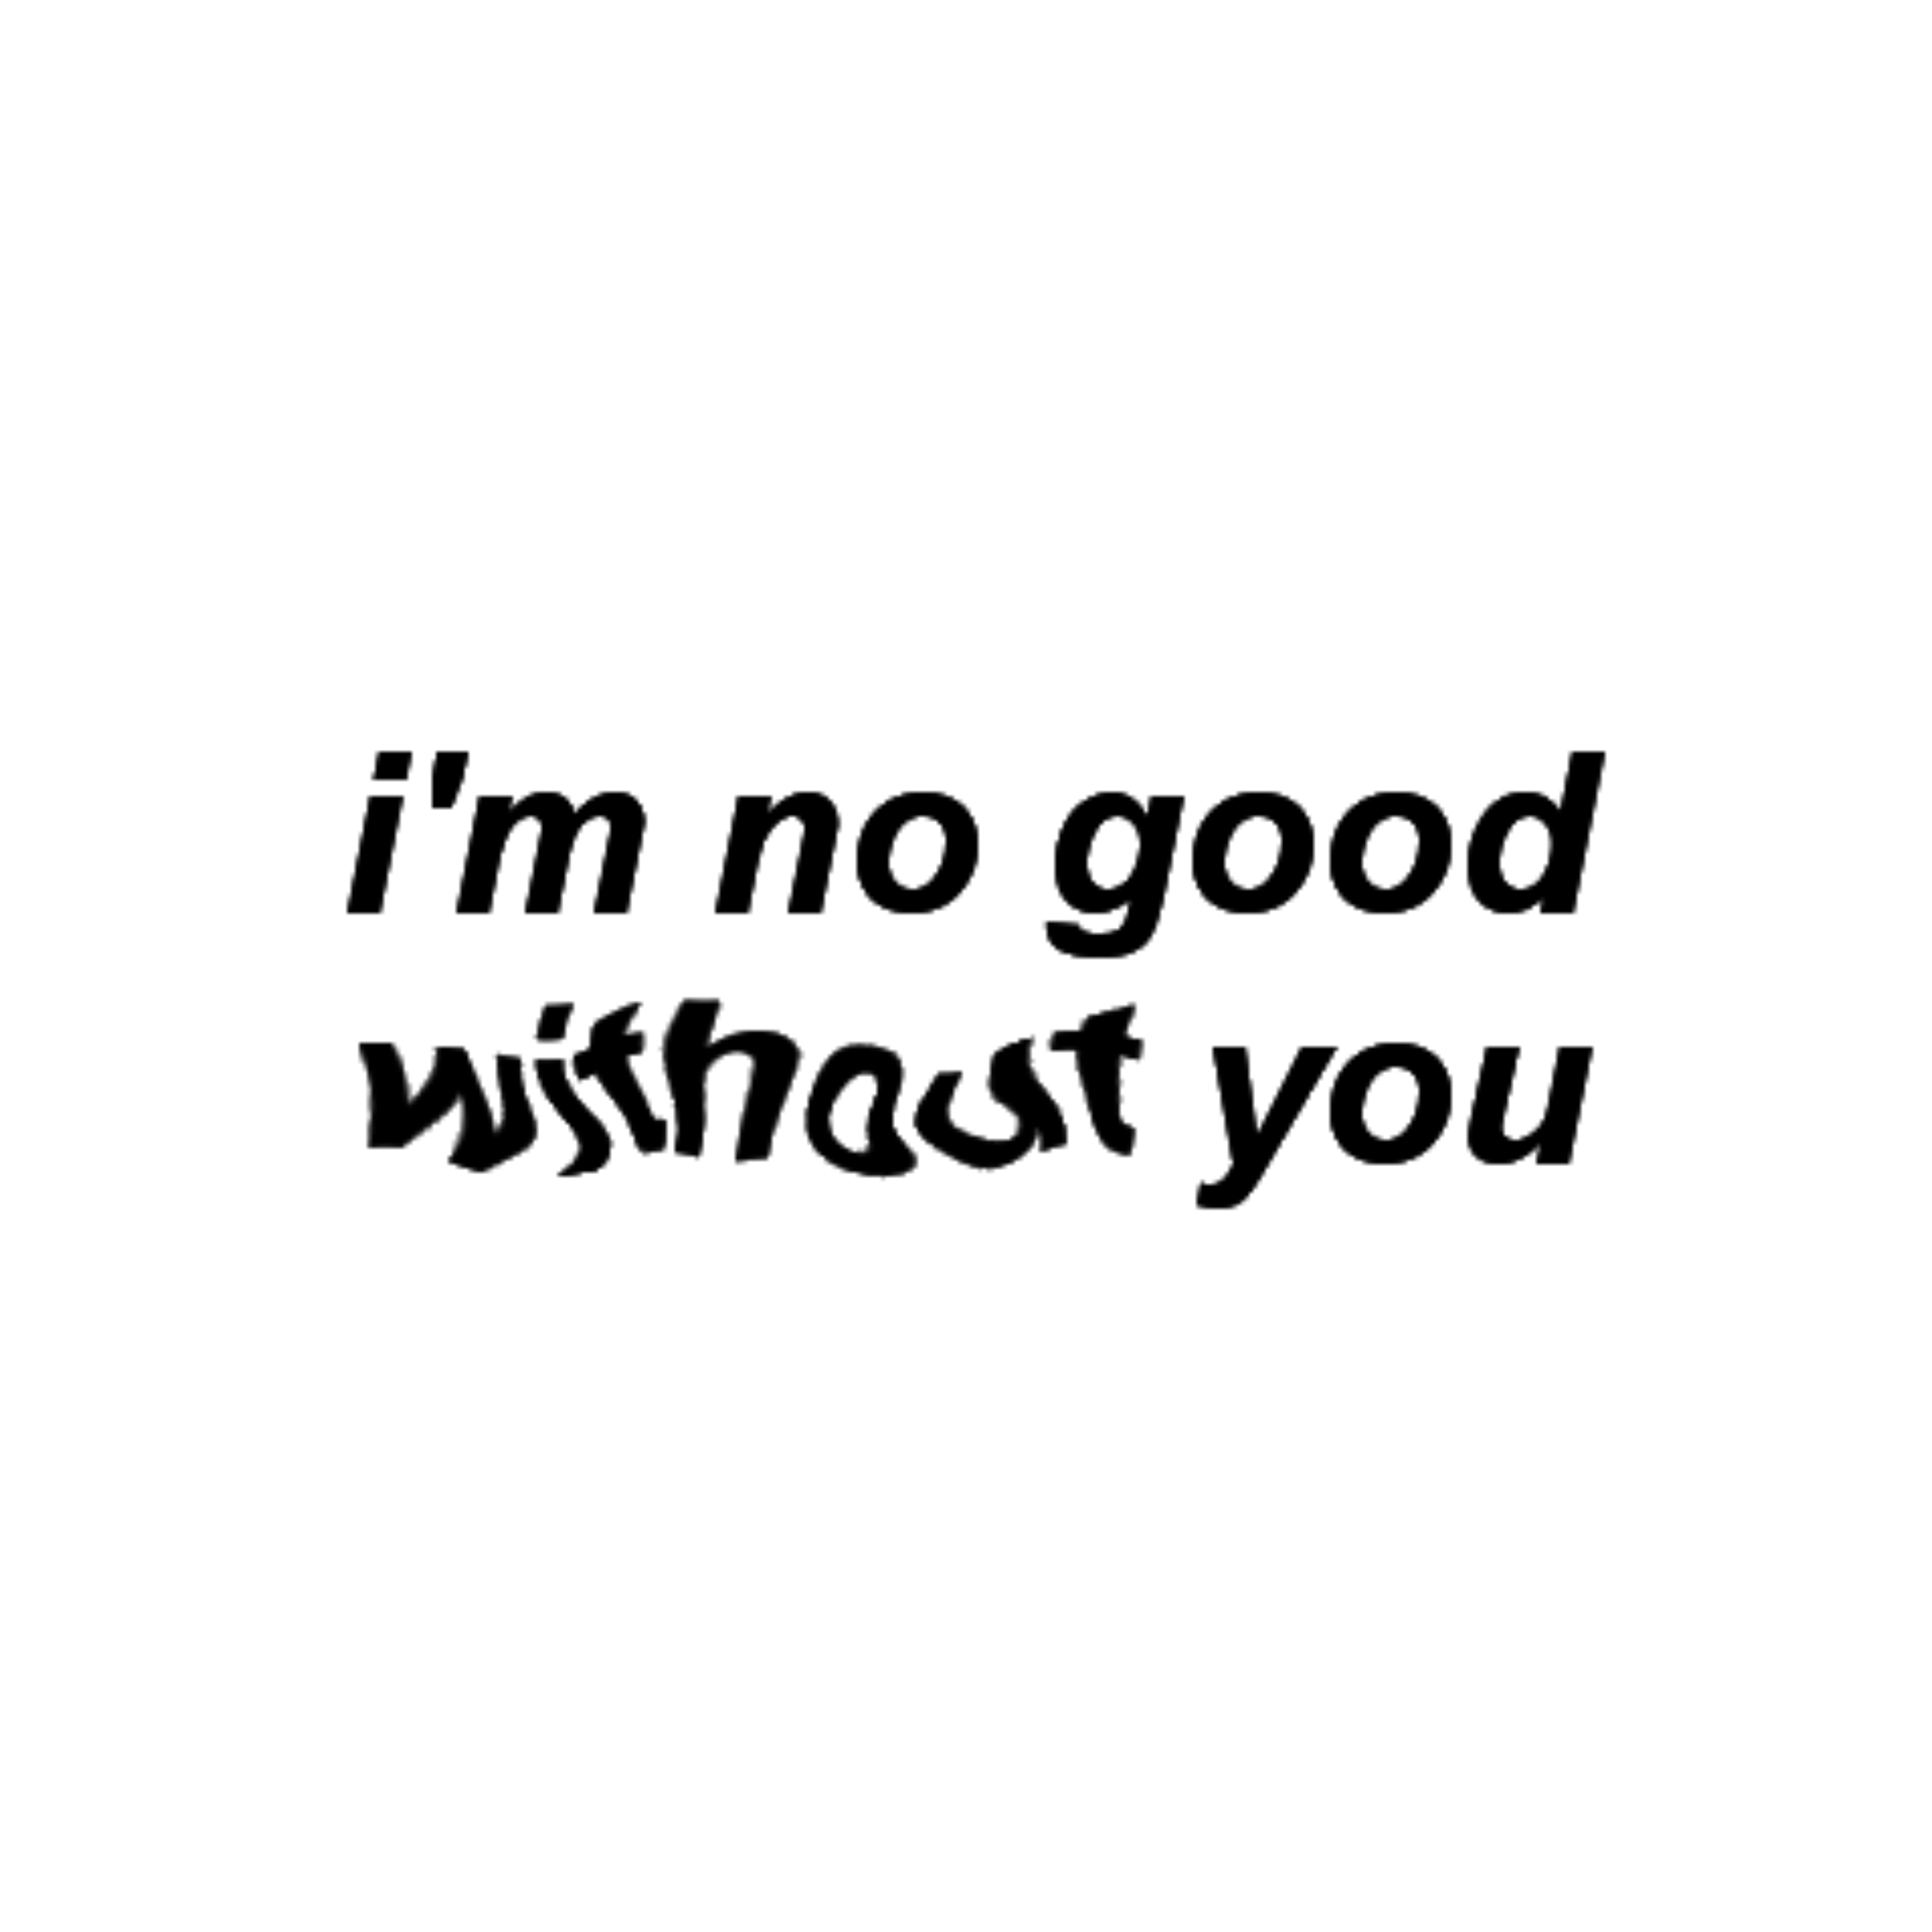 aesthetic text quote remixit sticker im no good without